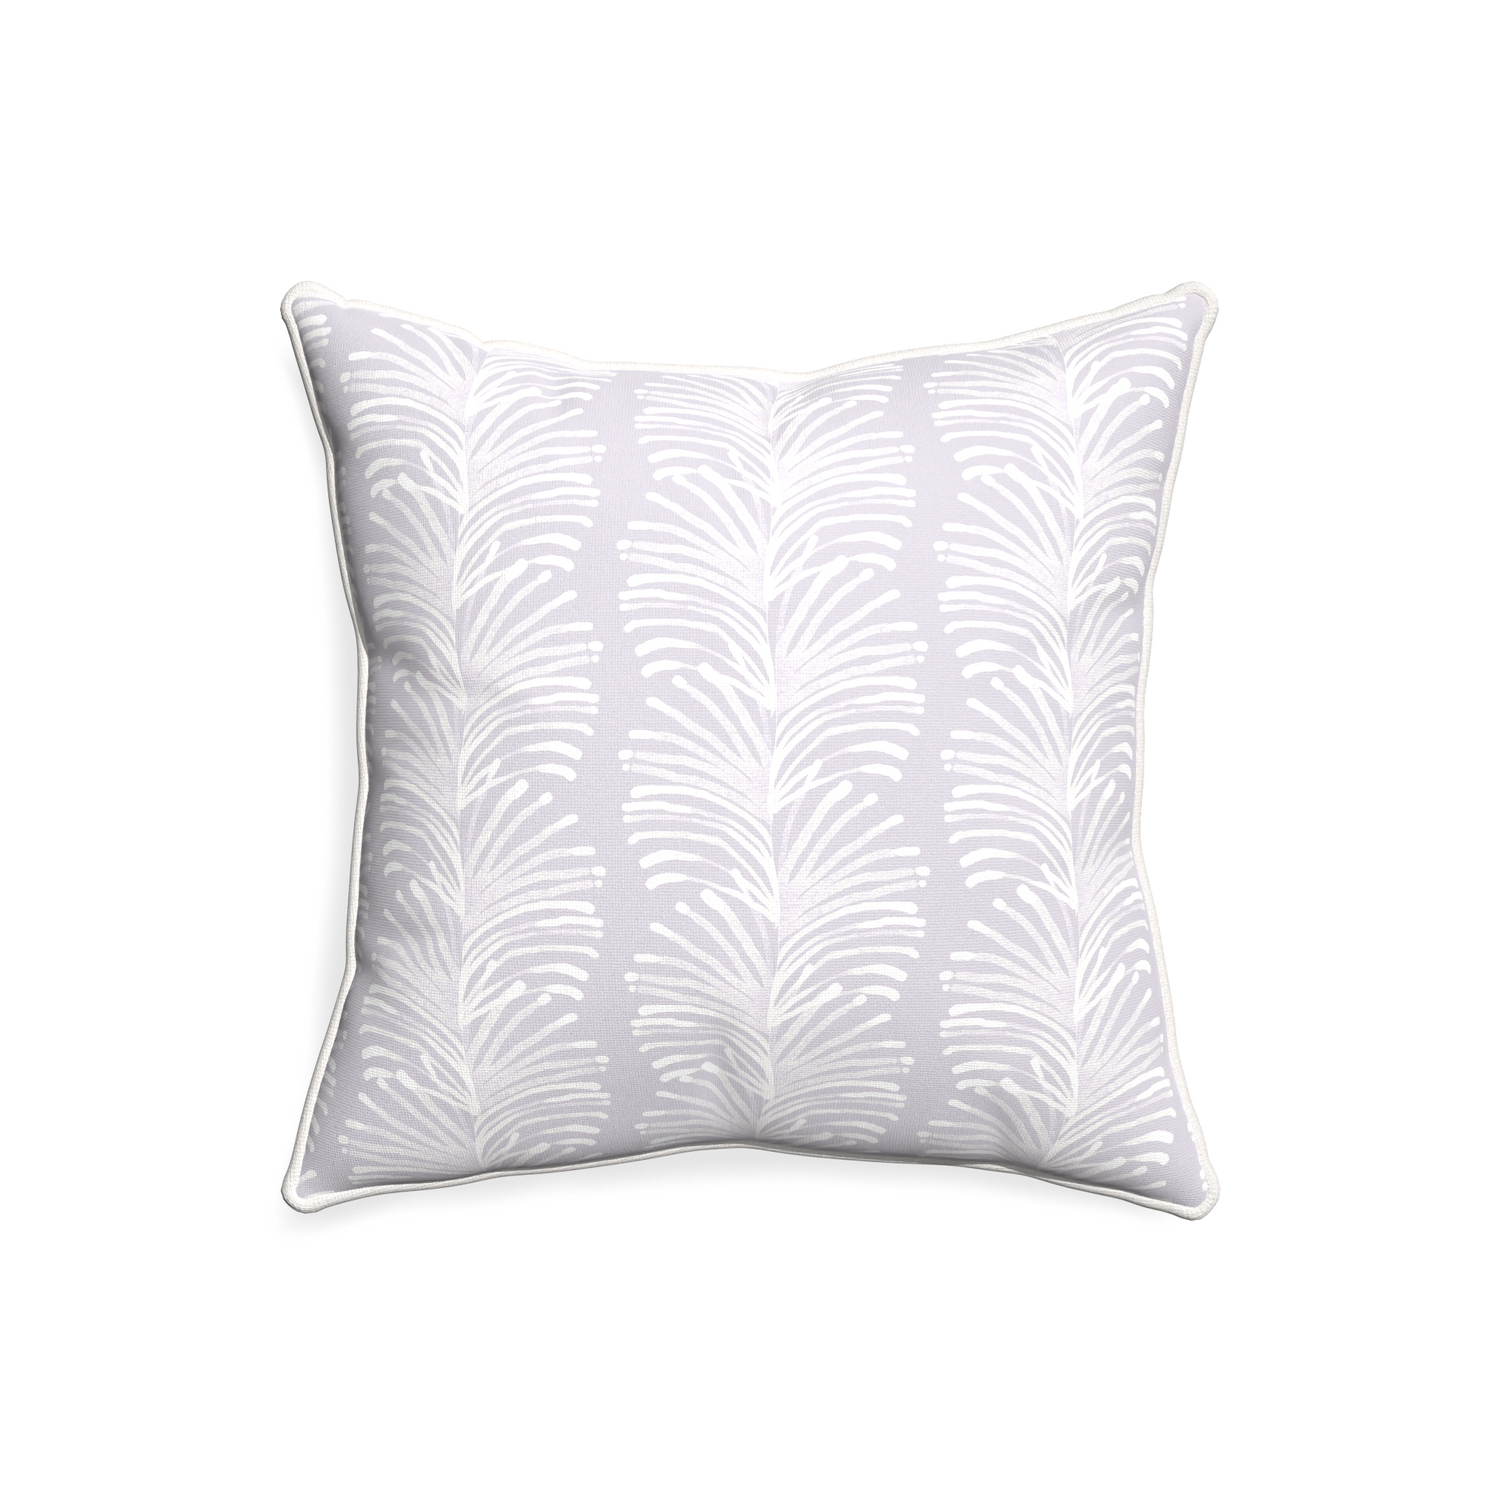 20-square emma lavender custom pillow with snow piping on white background